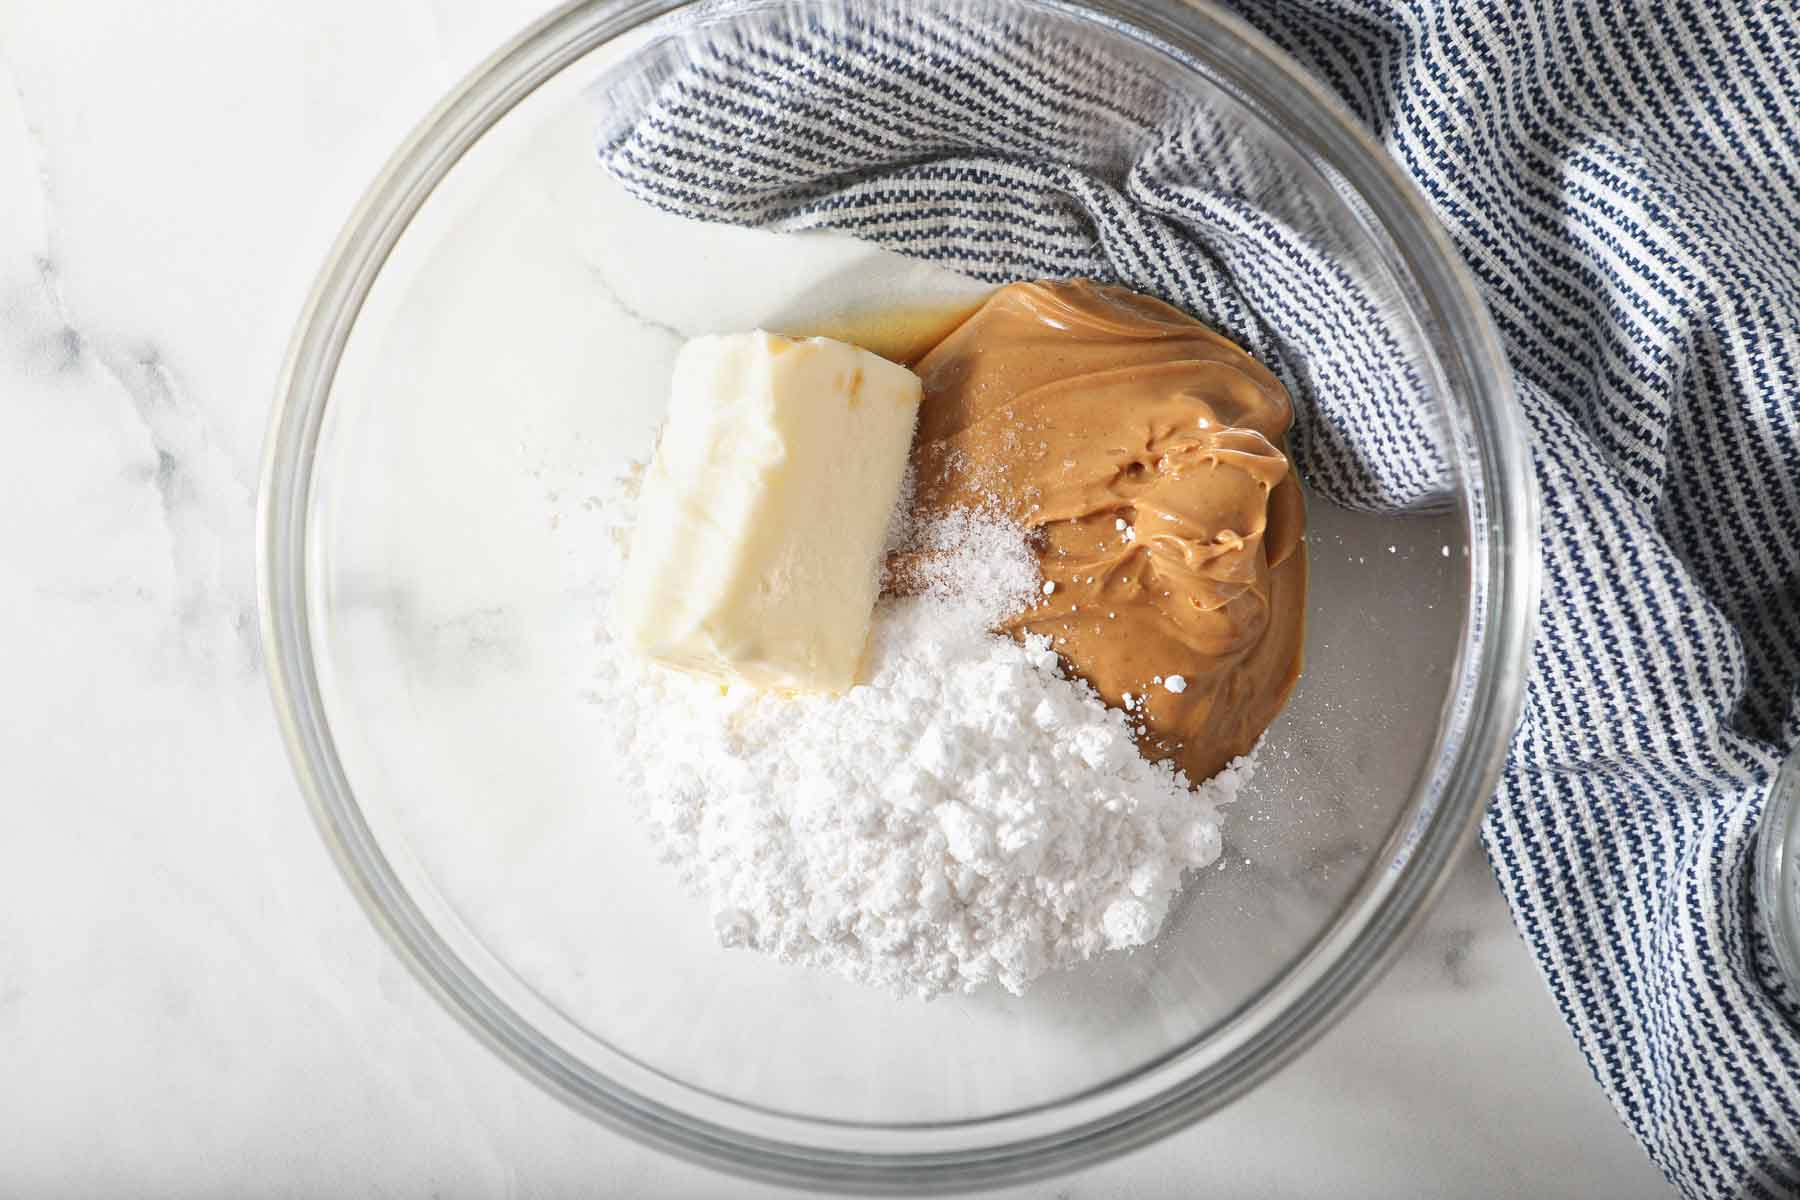 Butter, peanut butter, and powdered sugar in a clear glass bowl.